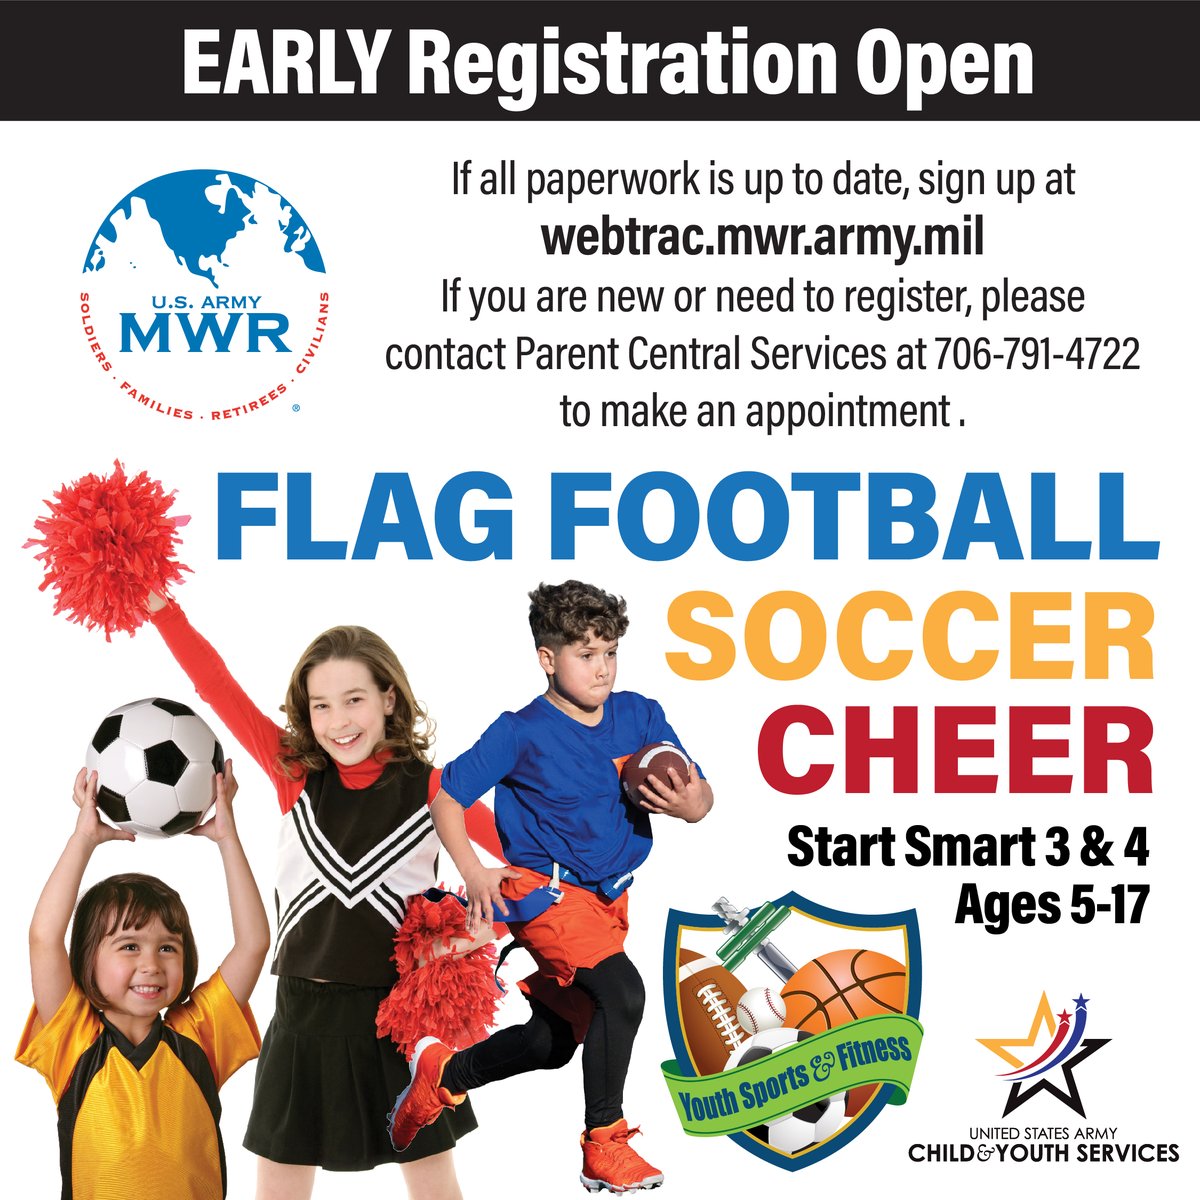 If you have a child interested in cheerleading, flag football or basketball, registration is open through Youth Sports & Fitness! Please contact Parent Central Services at 706-791-4722 for details.
#GordonMWR #CYSYouthSports #Cheerleading #Basketball #flagfootball